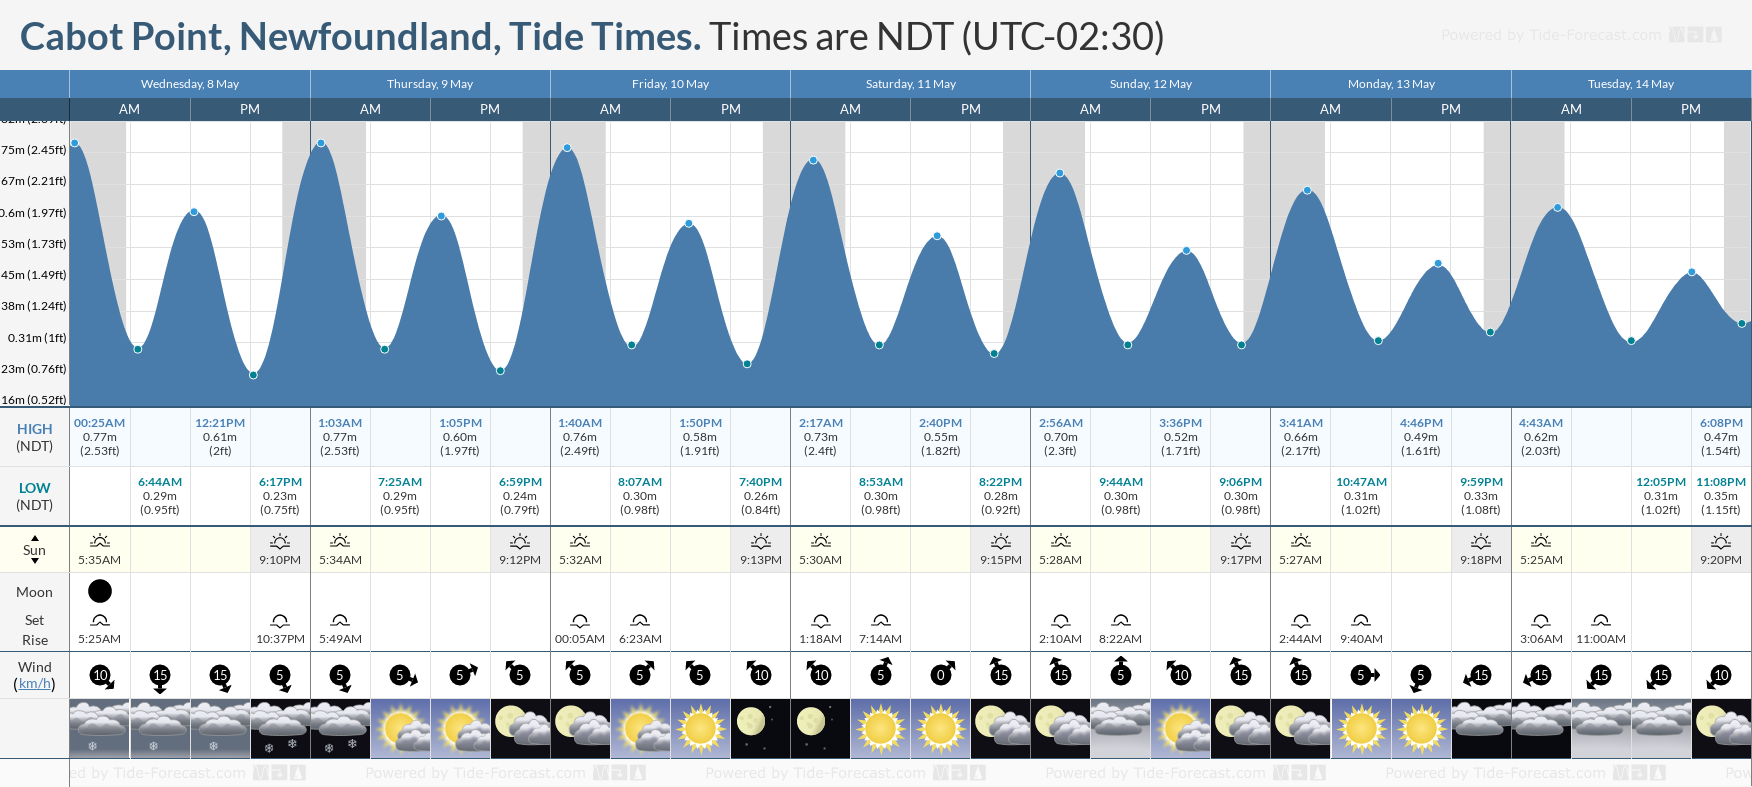 Cabot Point, Newfoundland Tide Chart including high and low tide tide times for the next 7 days